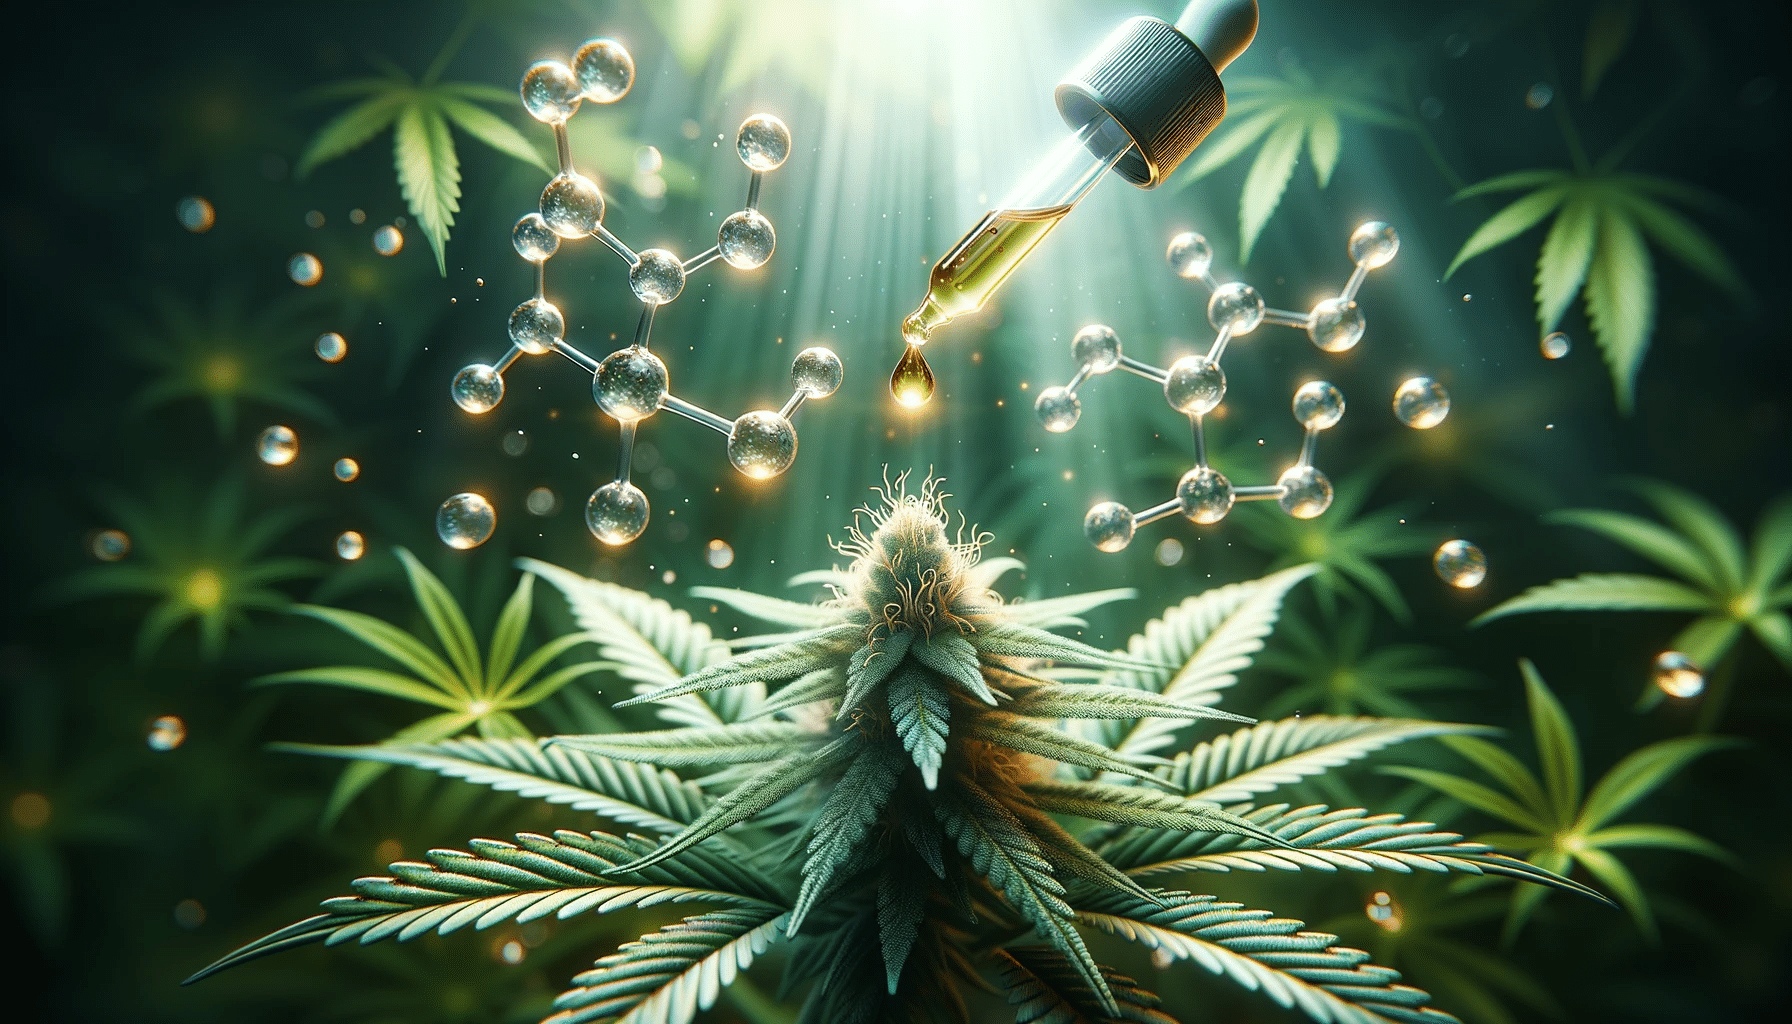 A Cannabis sativa plant, bathed in soft focus, provides a lush and vibrant background. The main subject is a dropper in sharp focus, releasing a radiant drop of CBD oil that captures and refracts the light. Floating above are delicate, semi-transparent molecular structures, illustrating the essence of CBD. The entire scene's lighting is orchestrated to make the CBD oil drop shine and stand out.